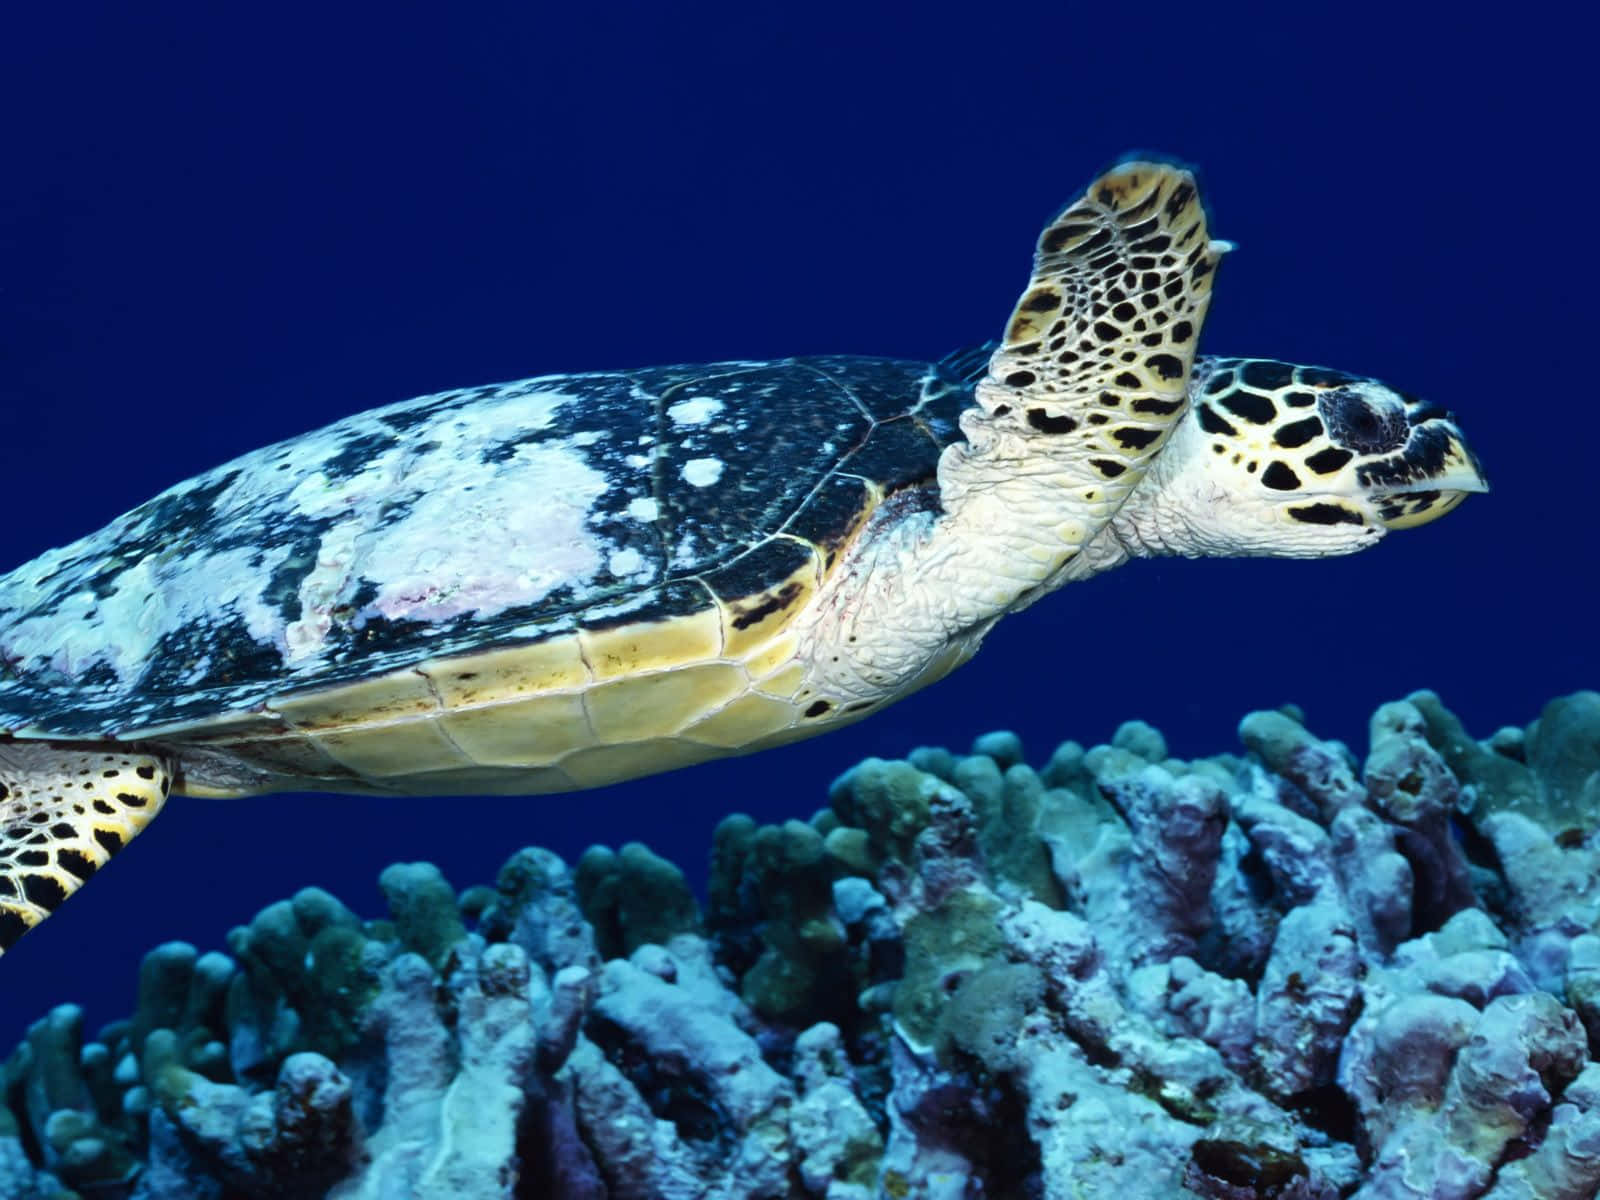 a turtle swimming over corals in the ocean